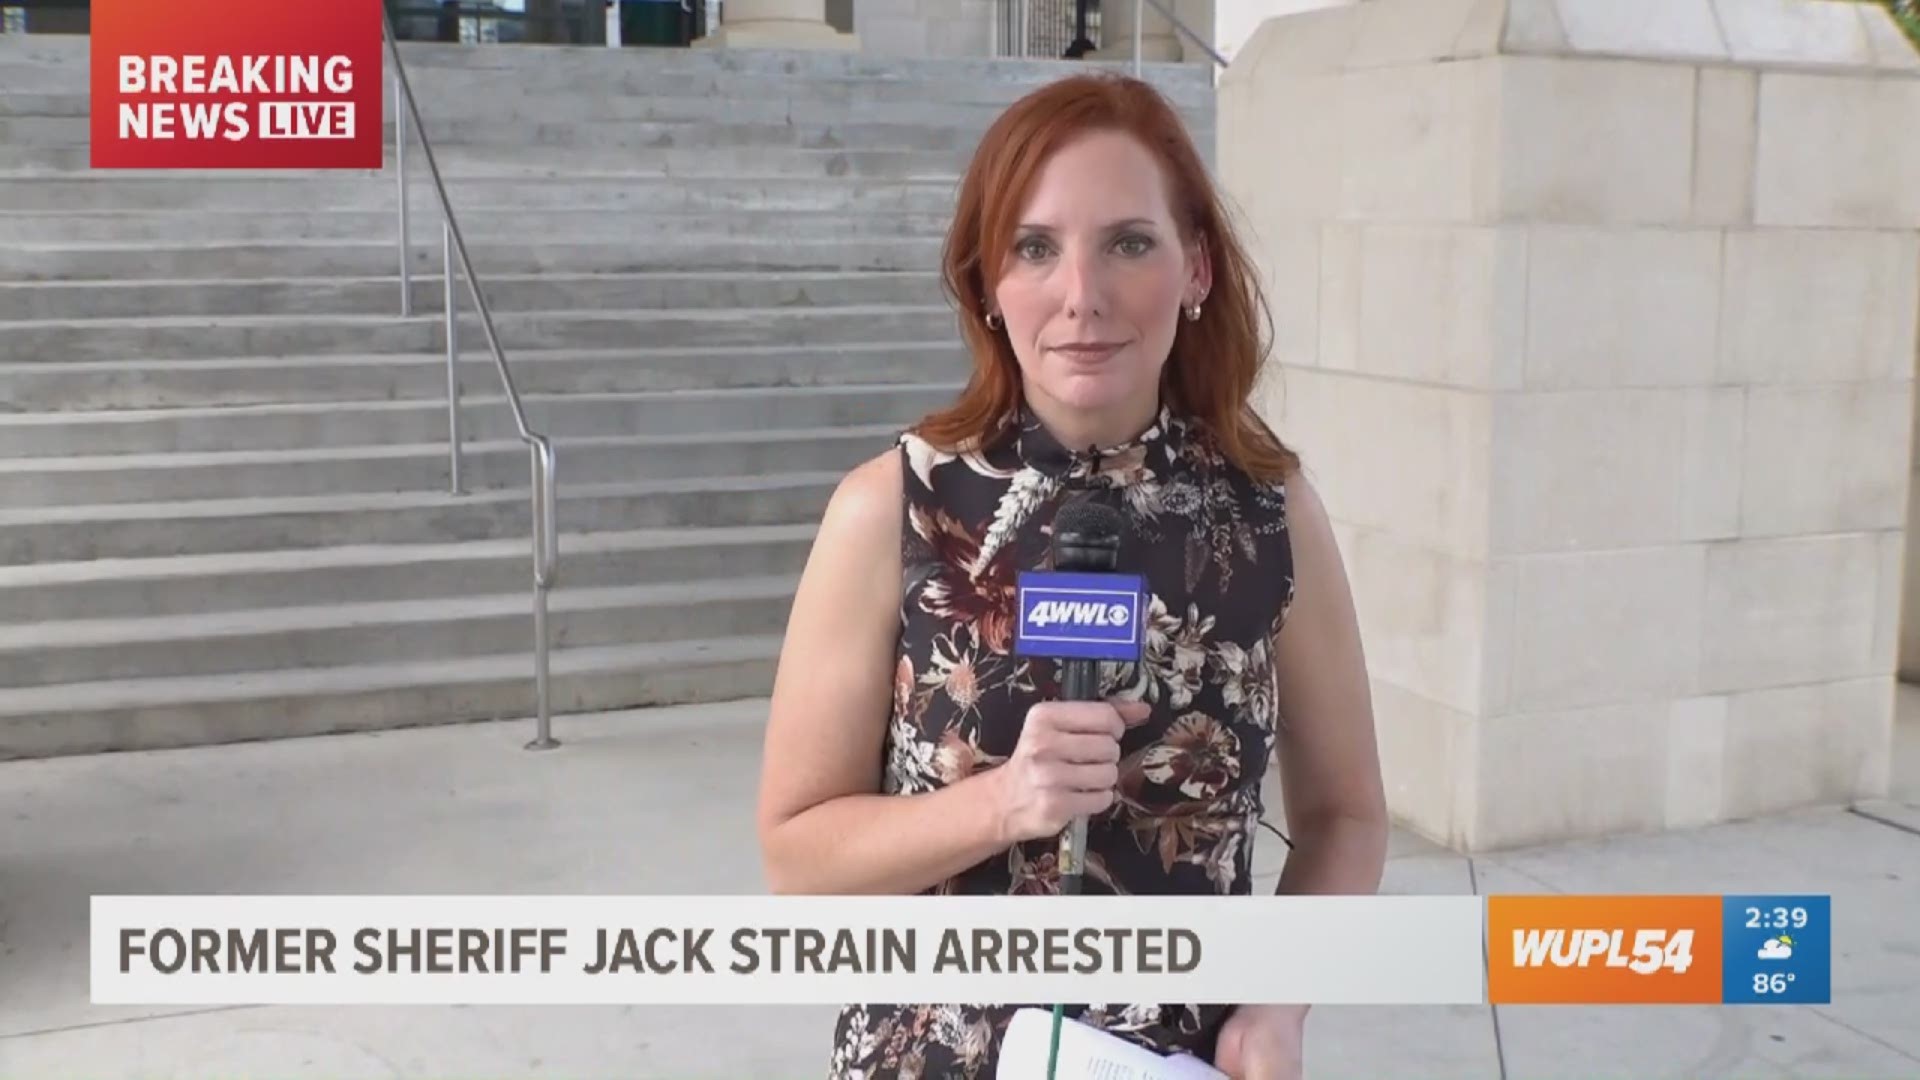 Investigative reporter Katie Moore, who has investigated Strain's dealings since 2013, gives more information on his sex crime charges outside the St. Tammany Parish Courthouse.